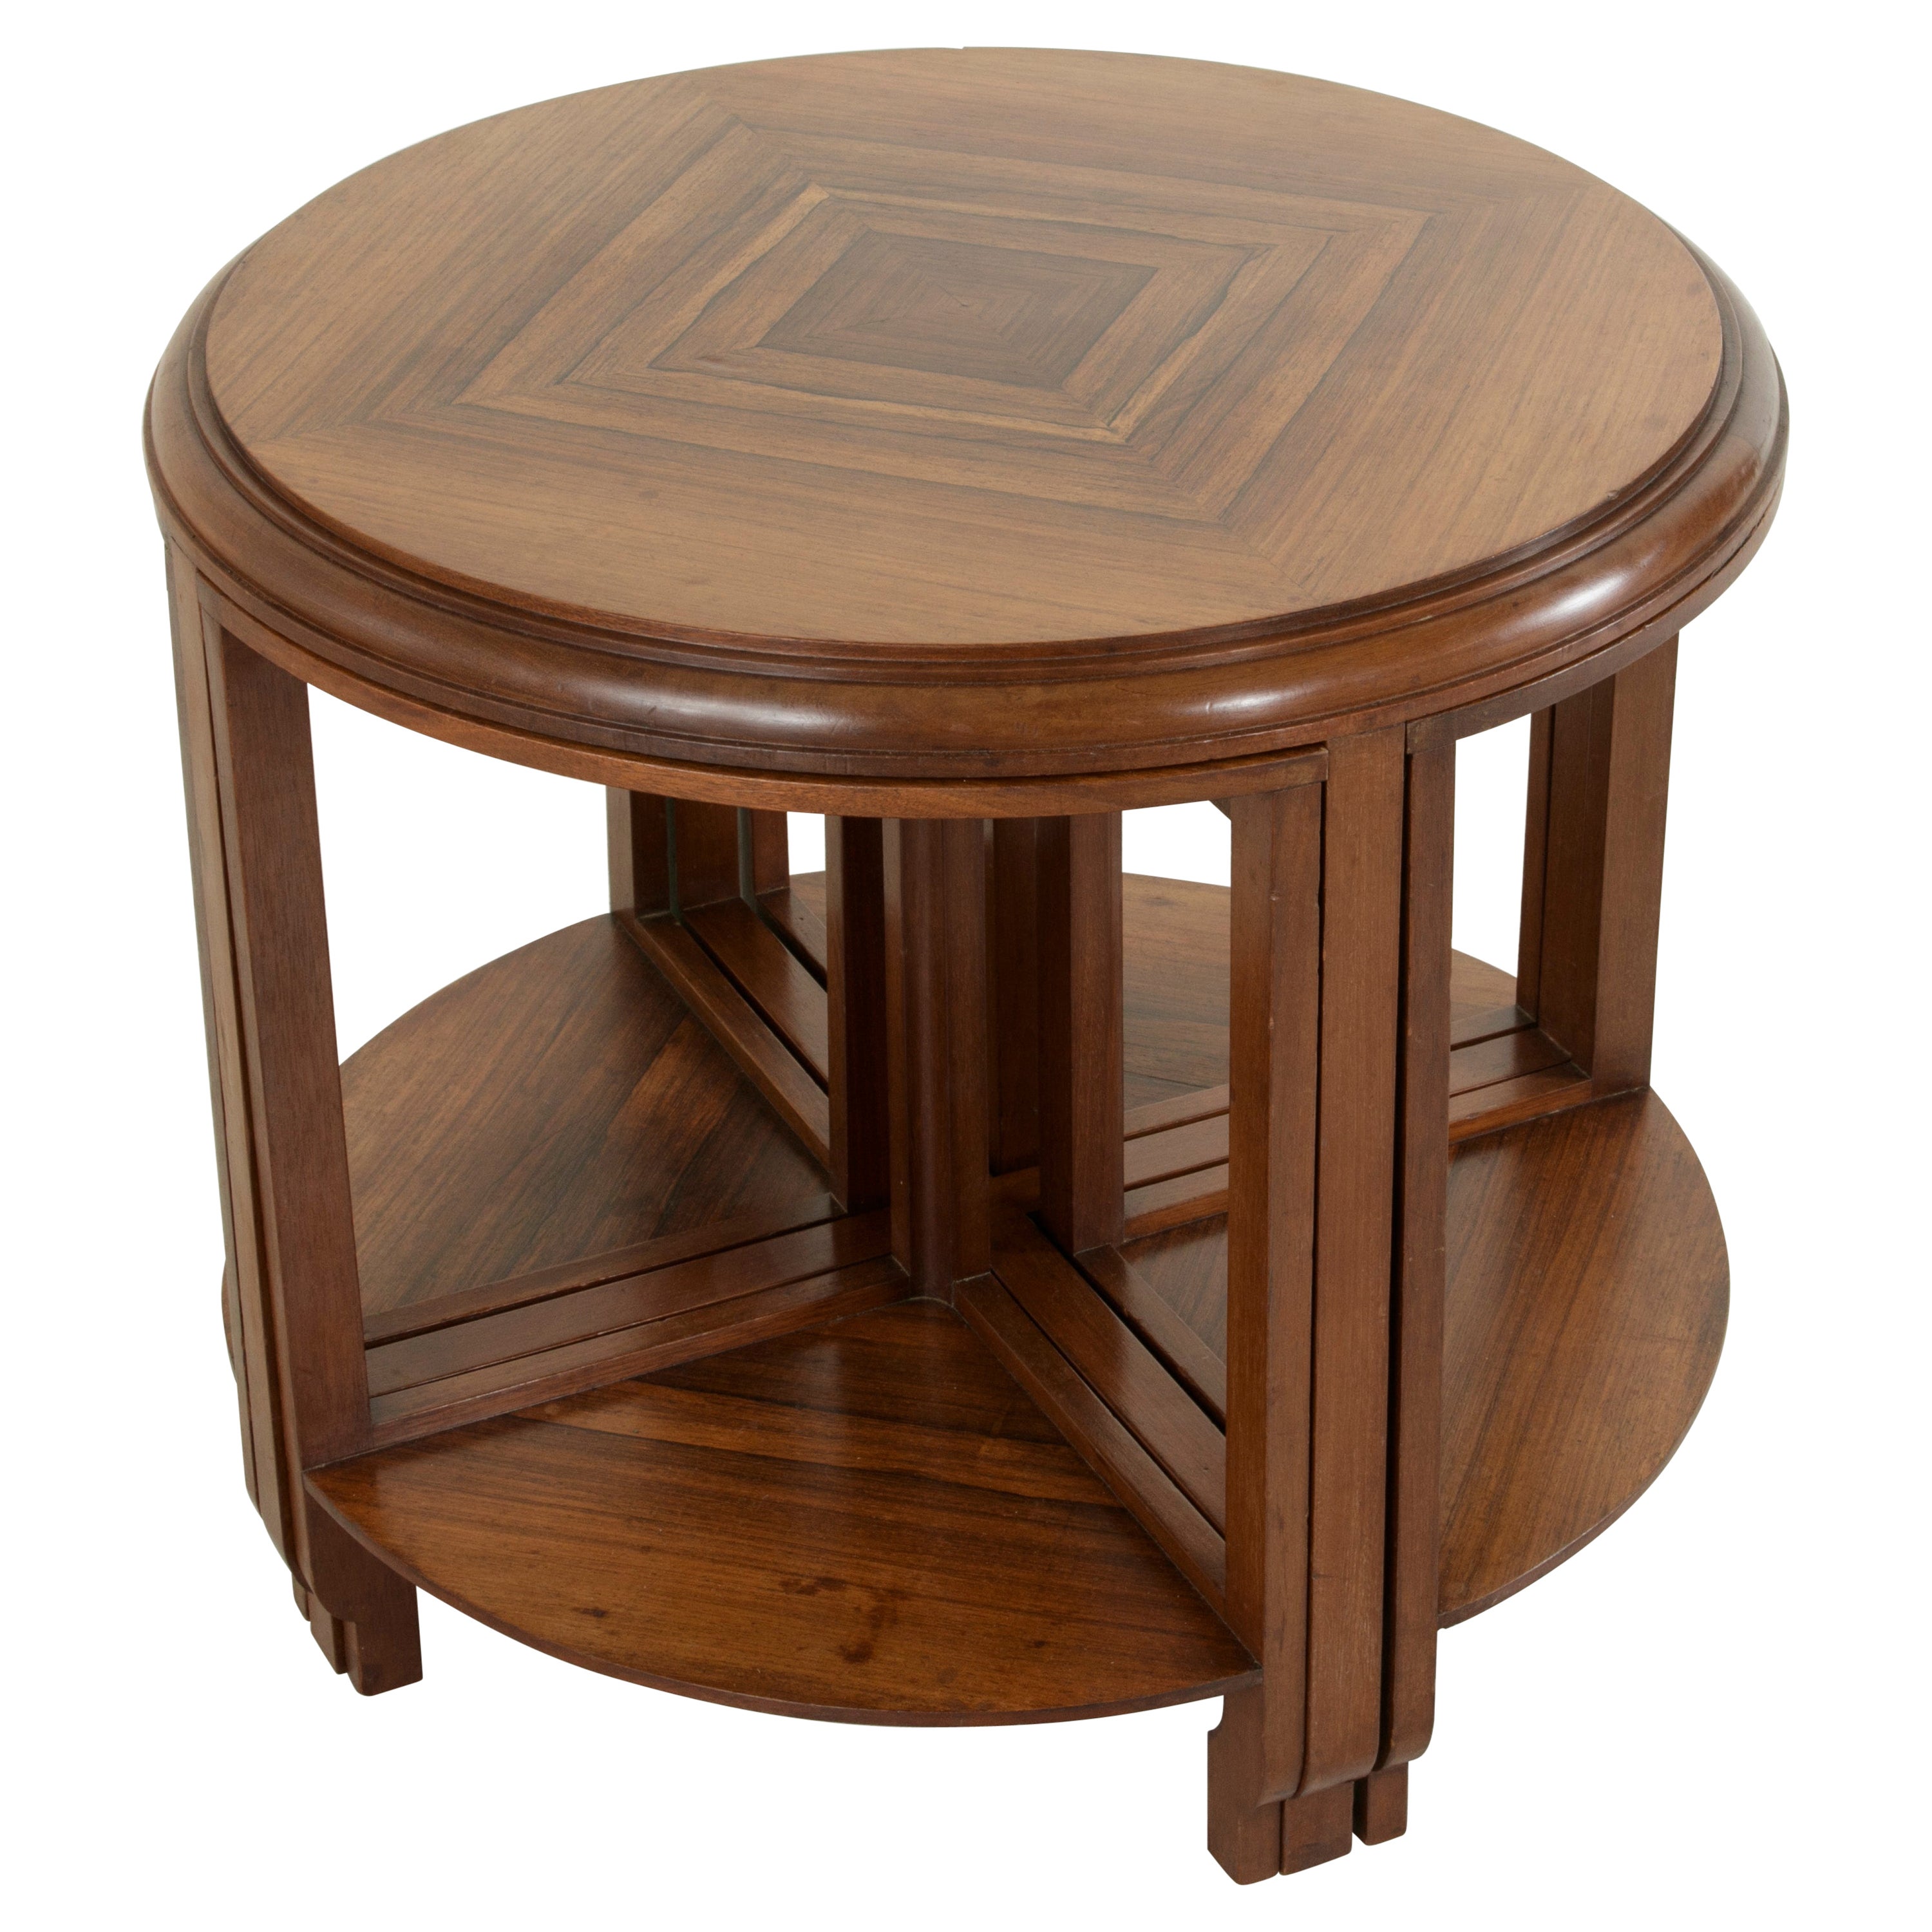 Early 20th Century French Art Deco Louis Majorelle Coffee Table, Nesting Tables For Sale